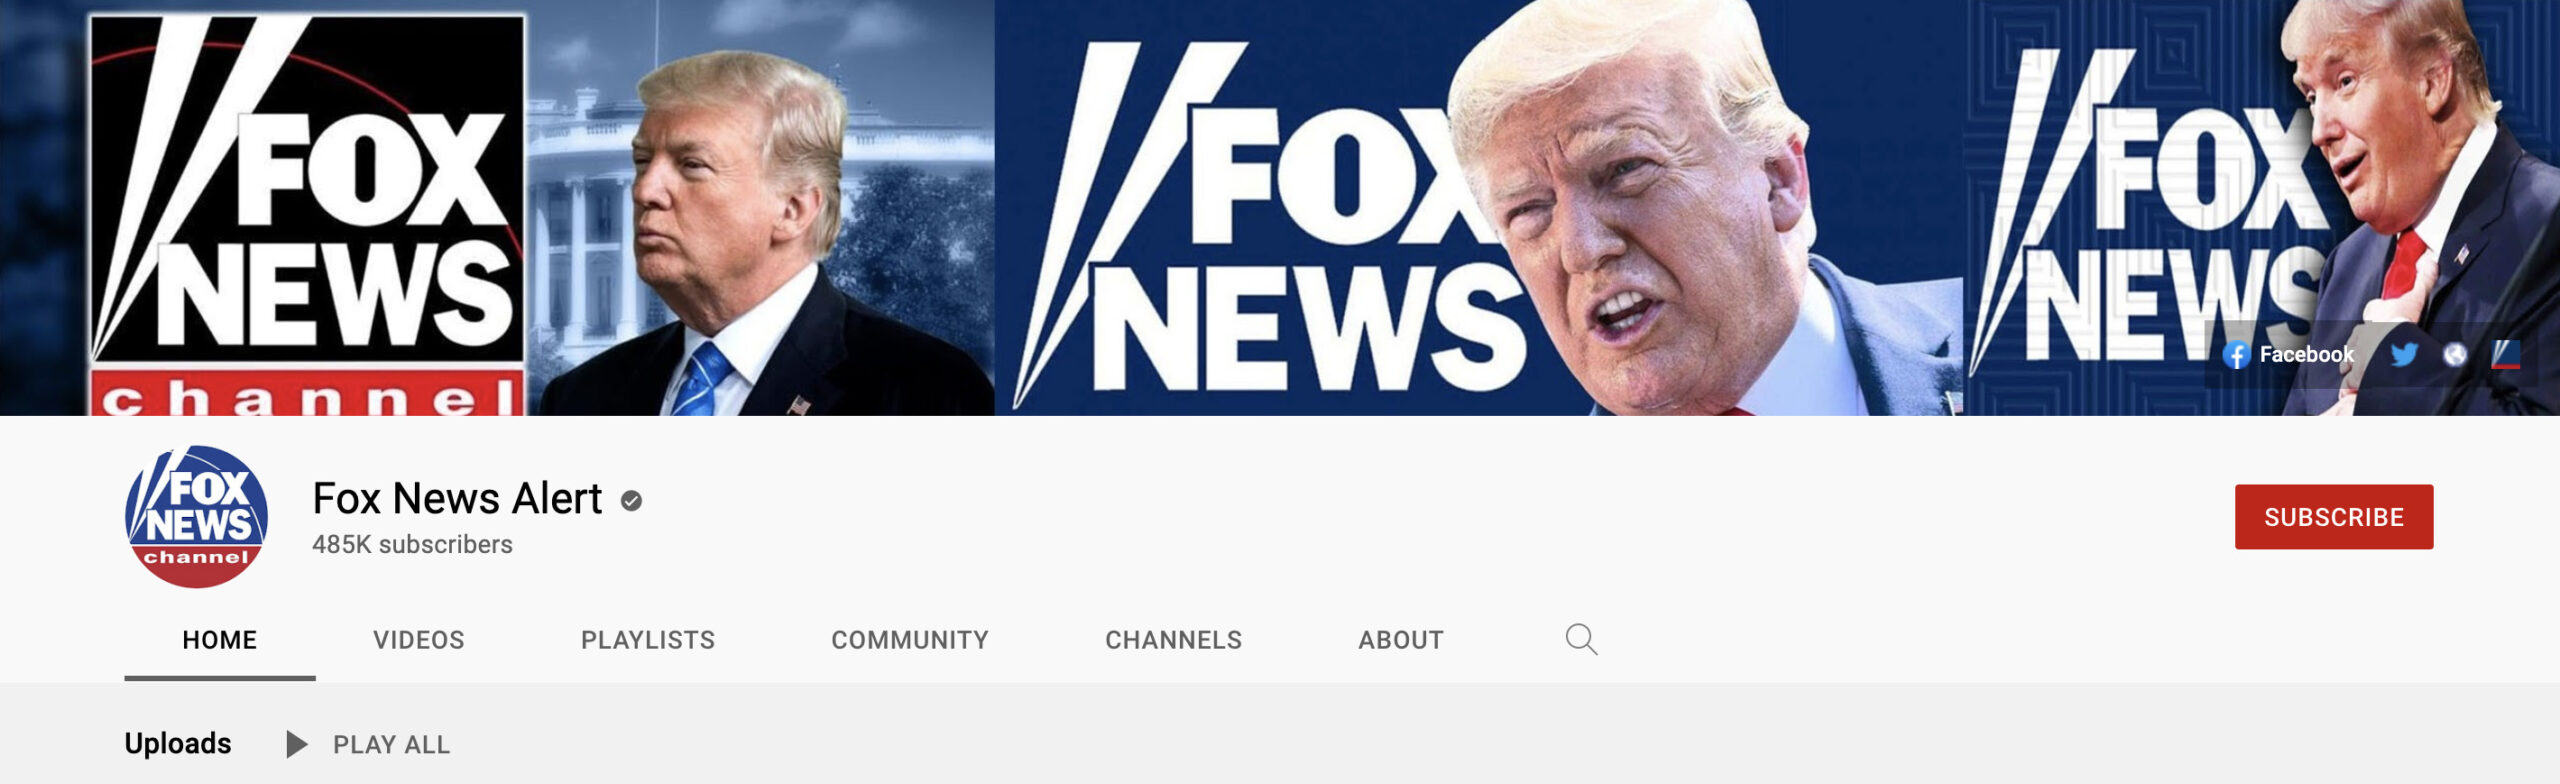 Verified YouTube channels are pushing altered thumbnails on Fox News videos on accounts called Fox News Alert.